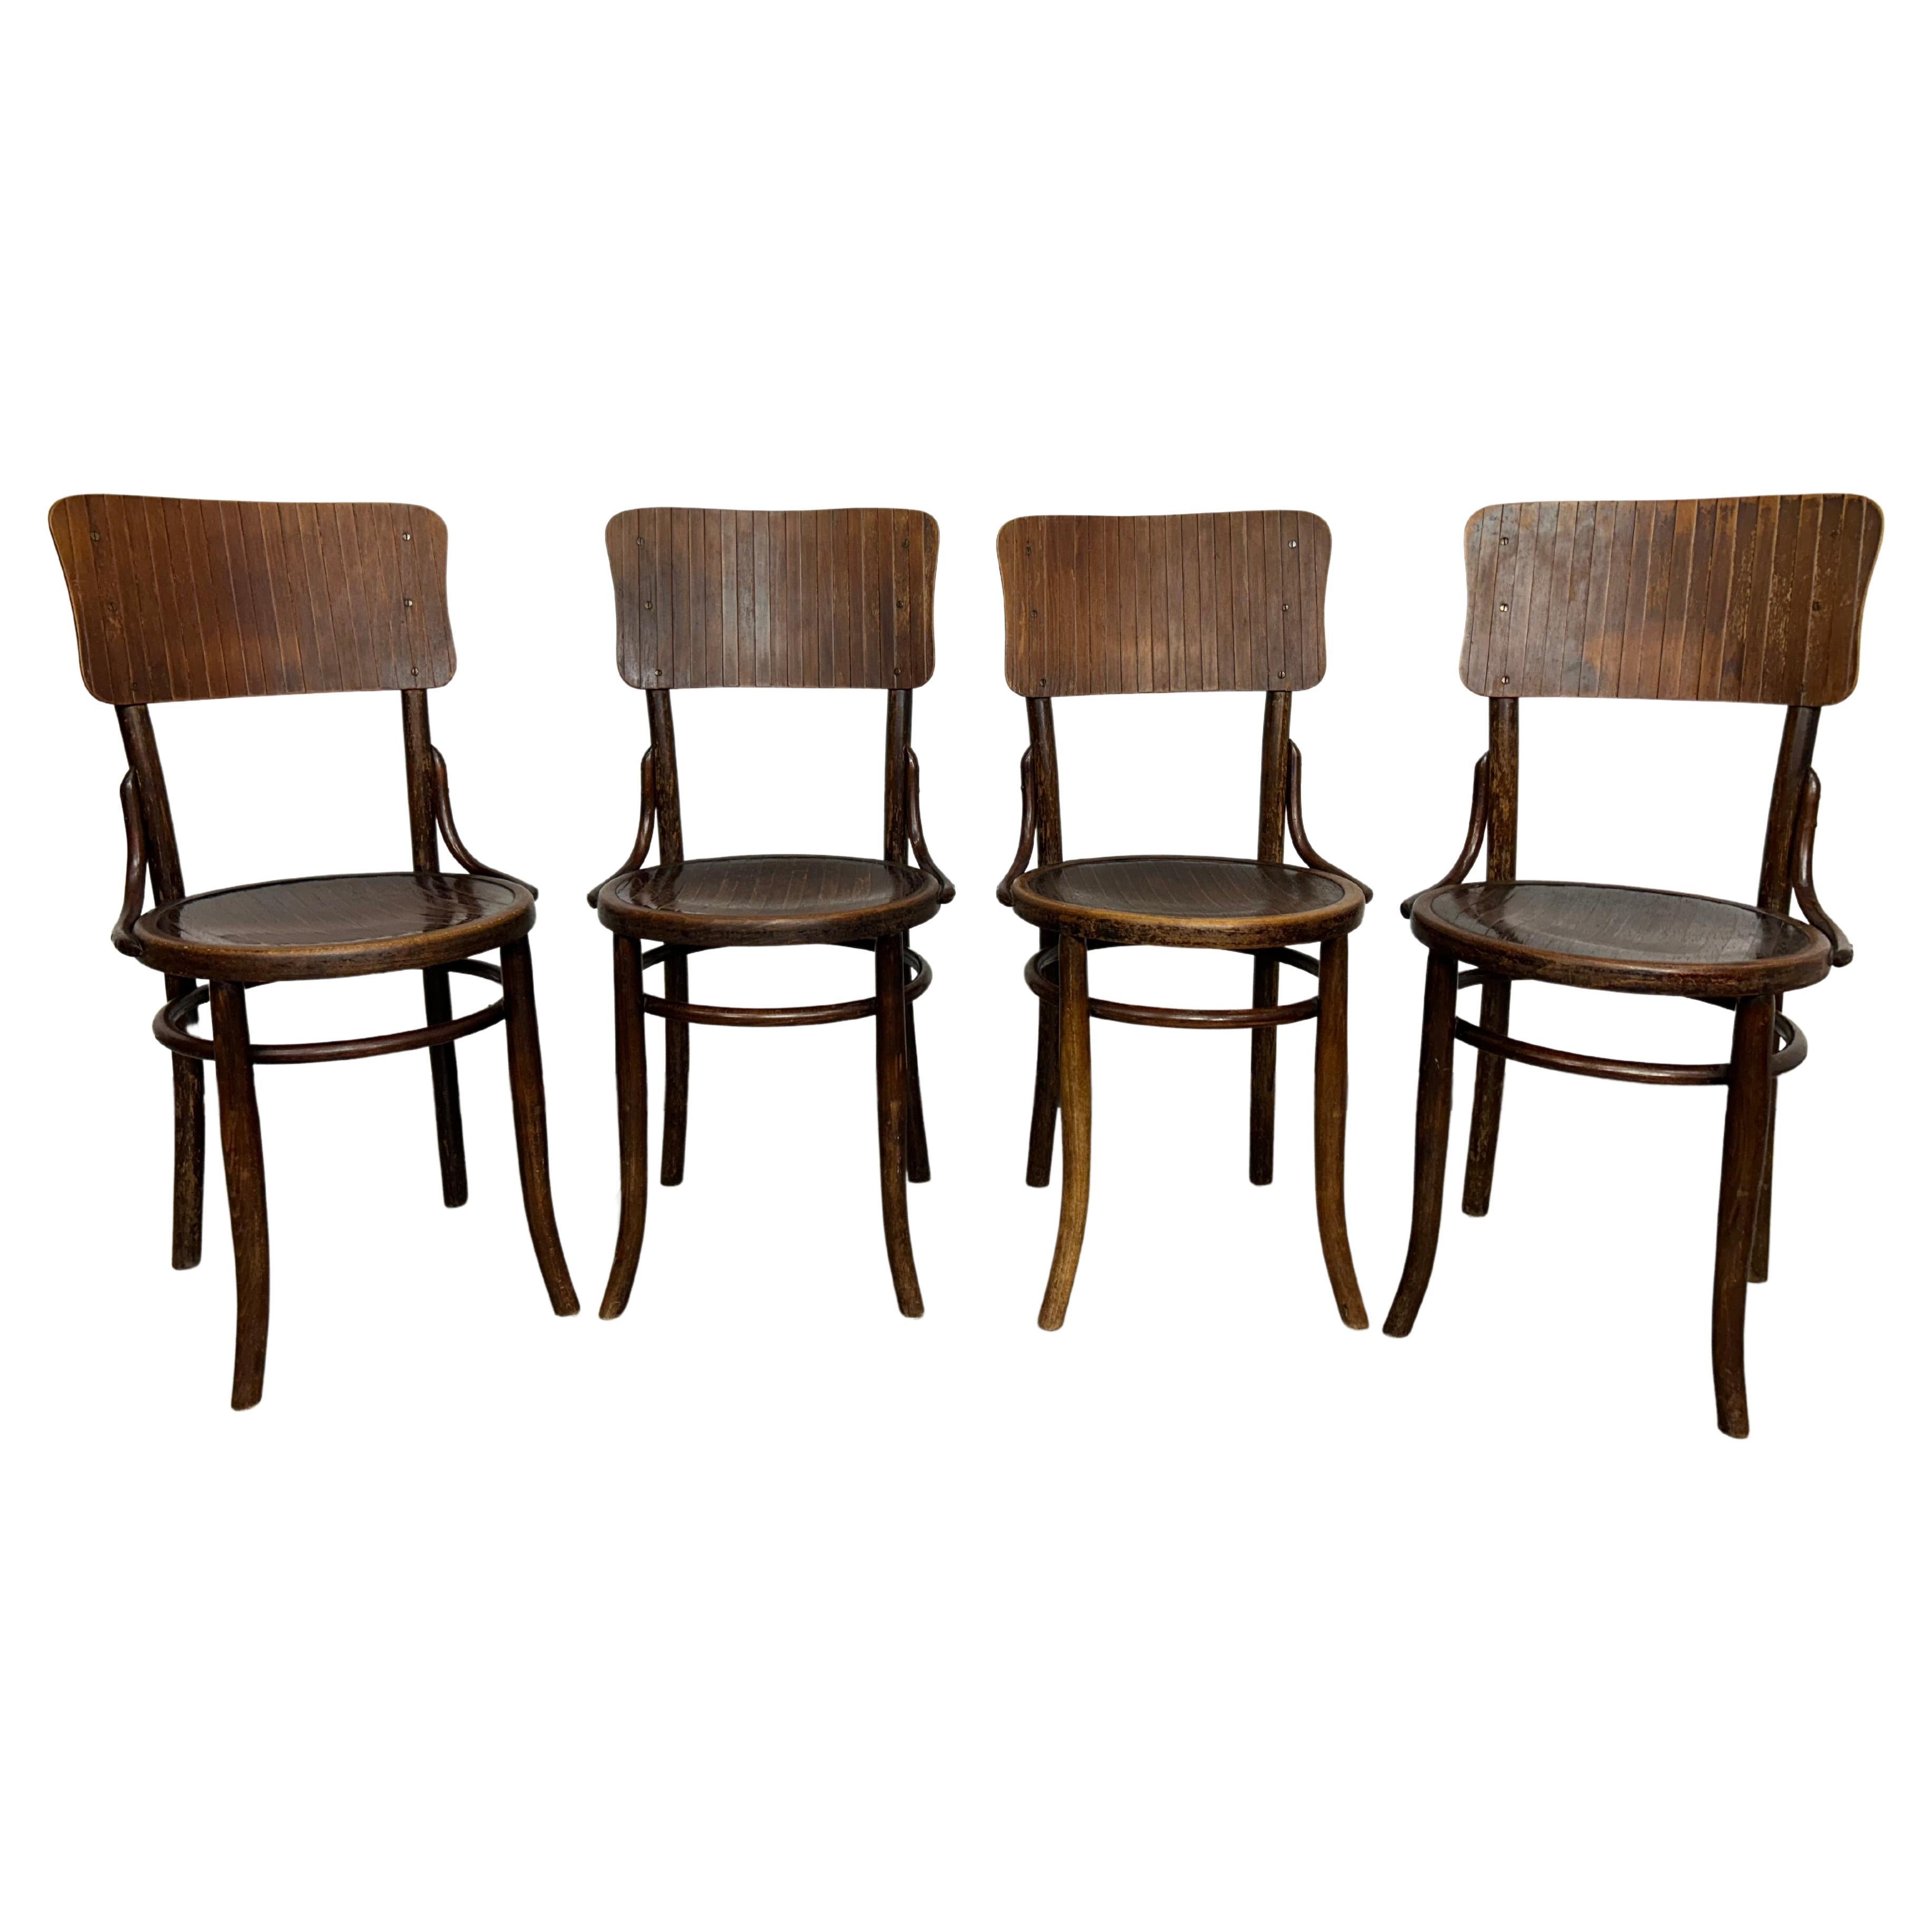 Slovak Dining Room Chairs